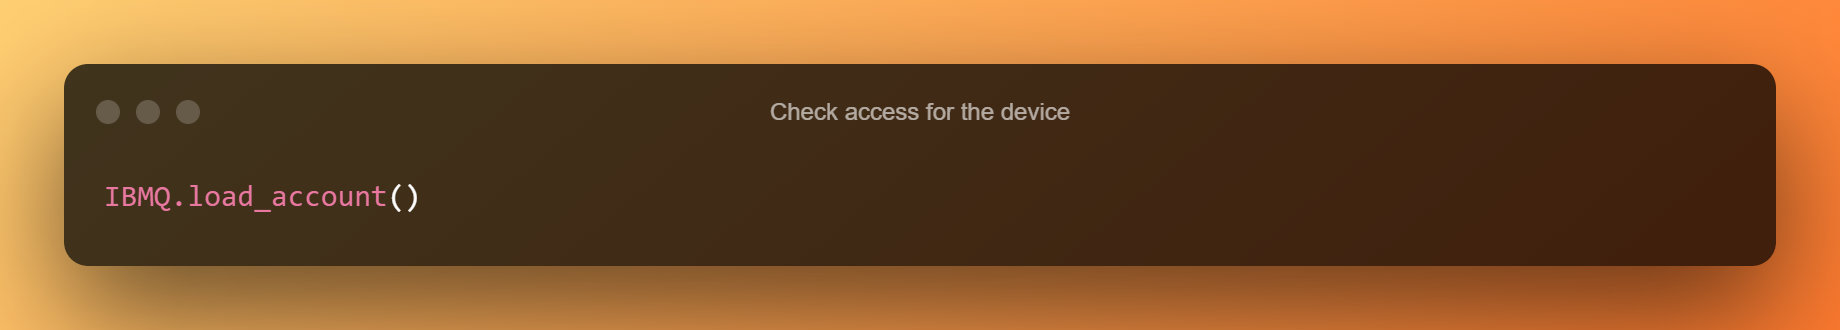 Check Access For The Device